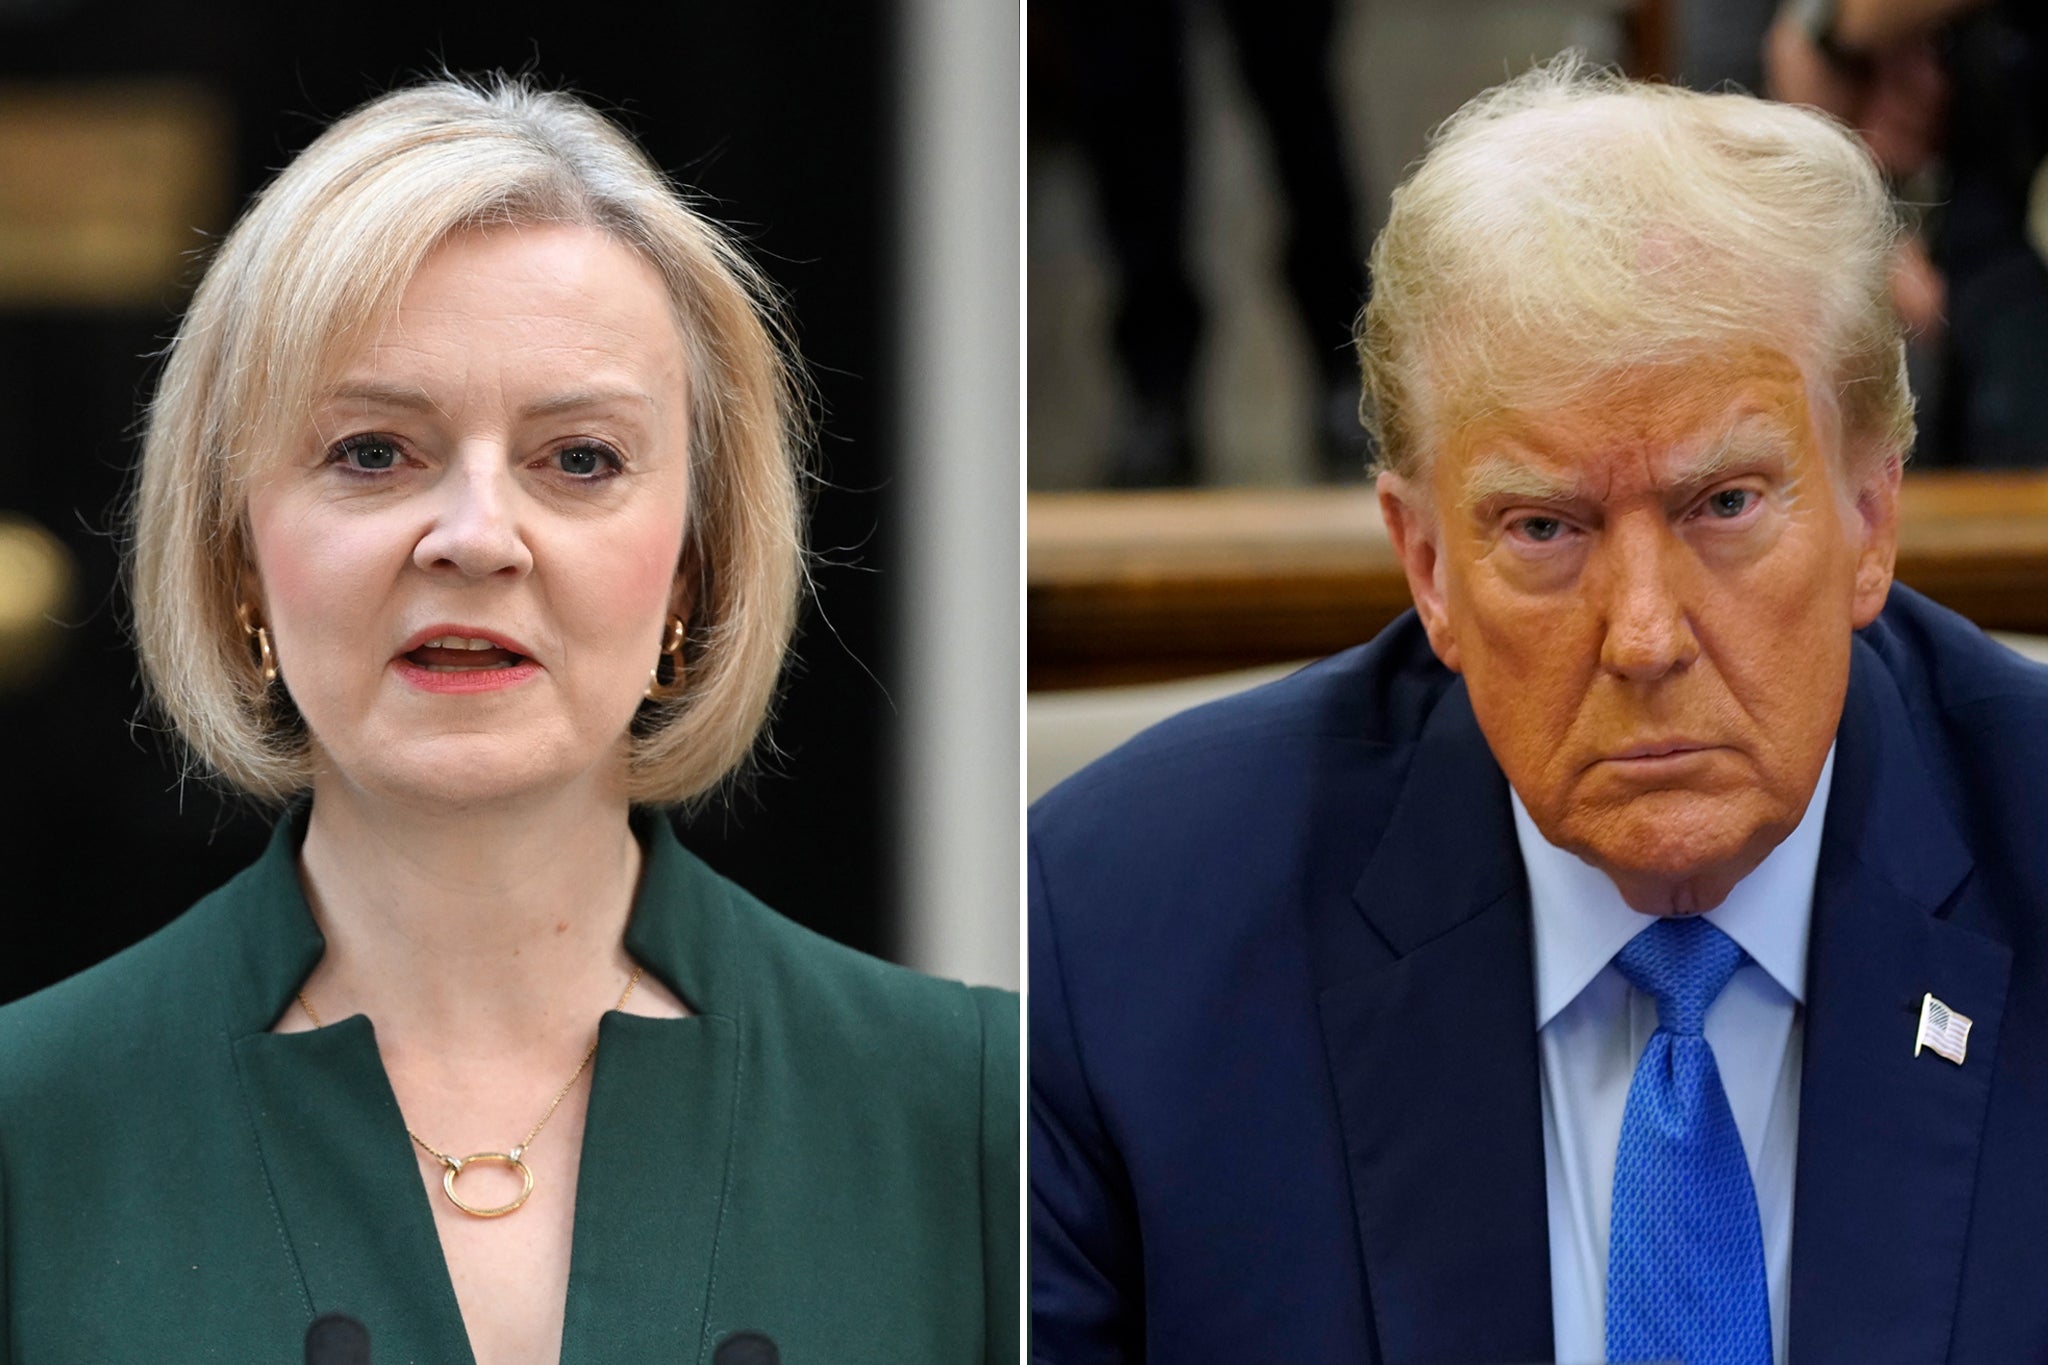 Ms Truss said there ‘must be conservative leadership in the US’ in order to ‘call out hostile regimes as evil and a threat’